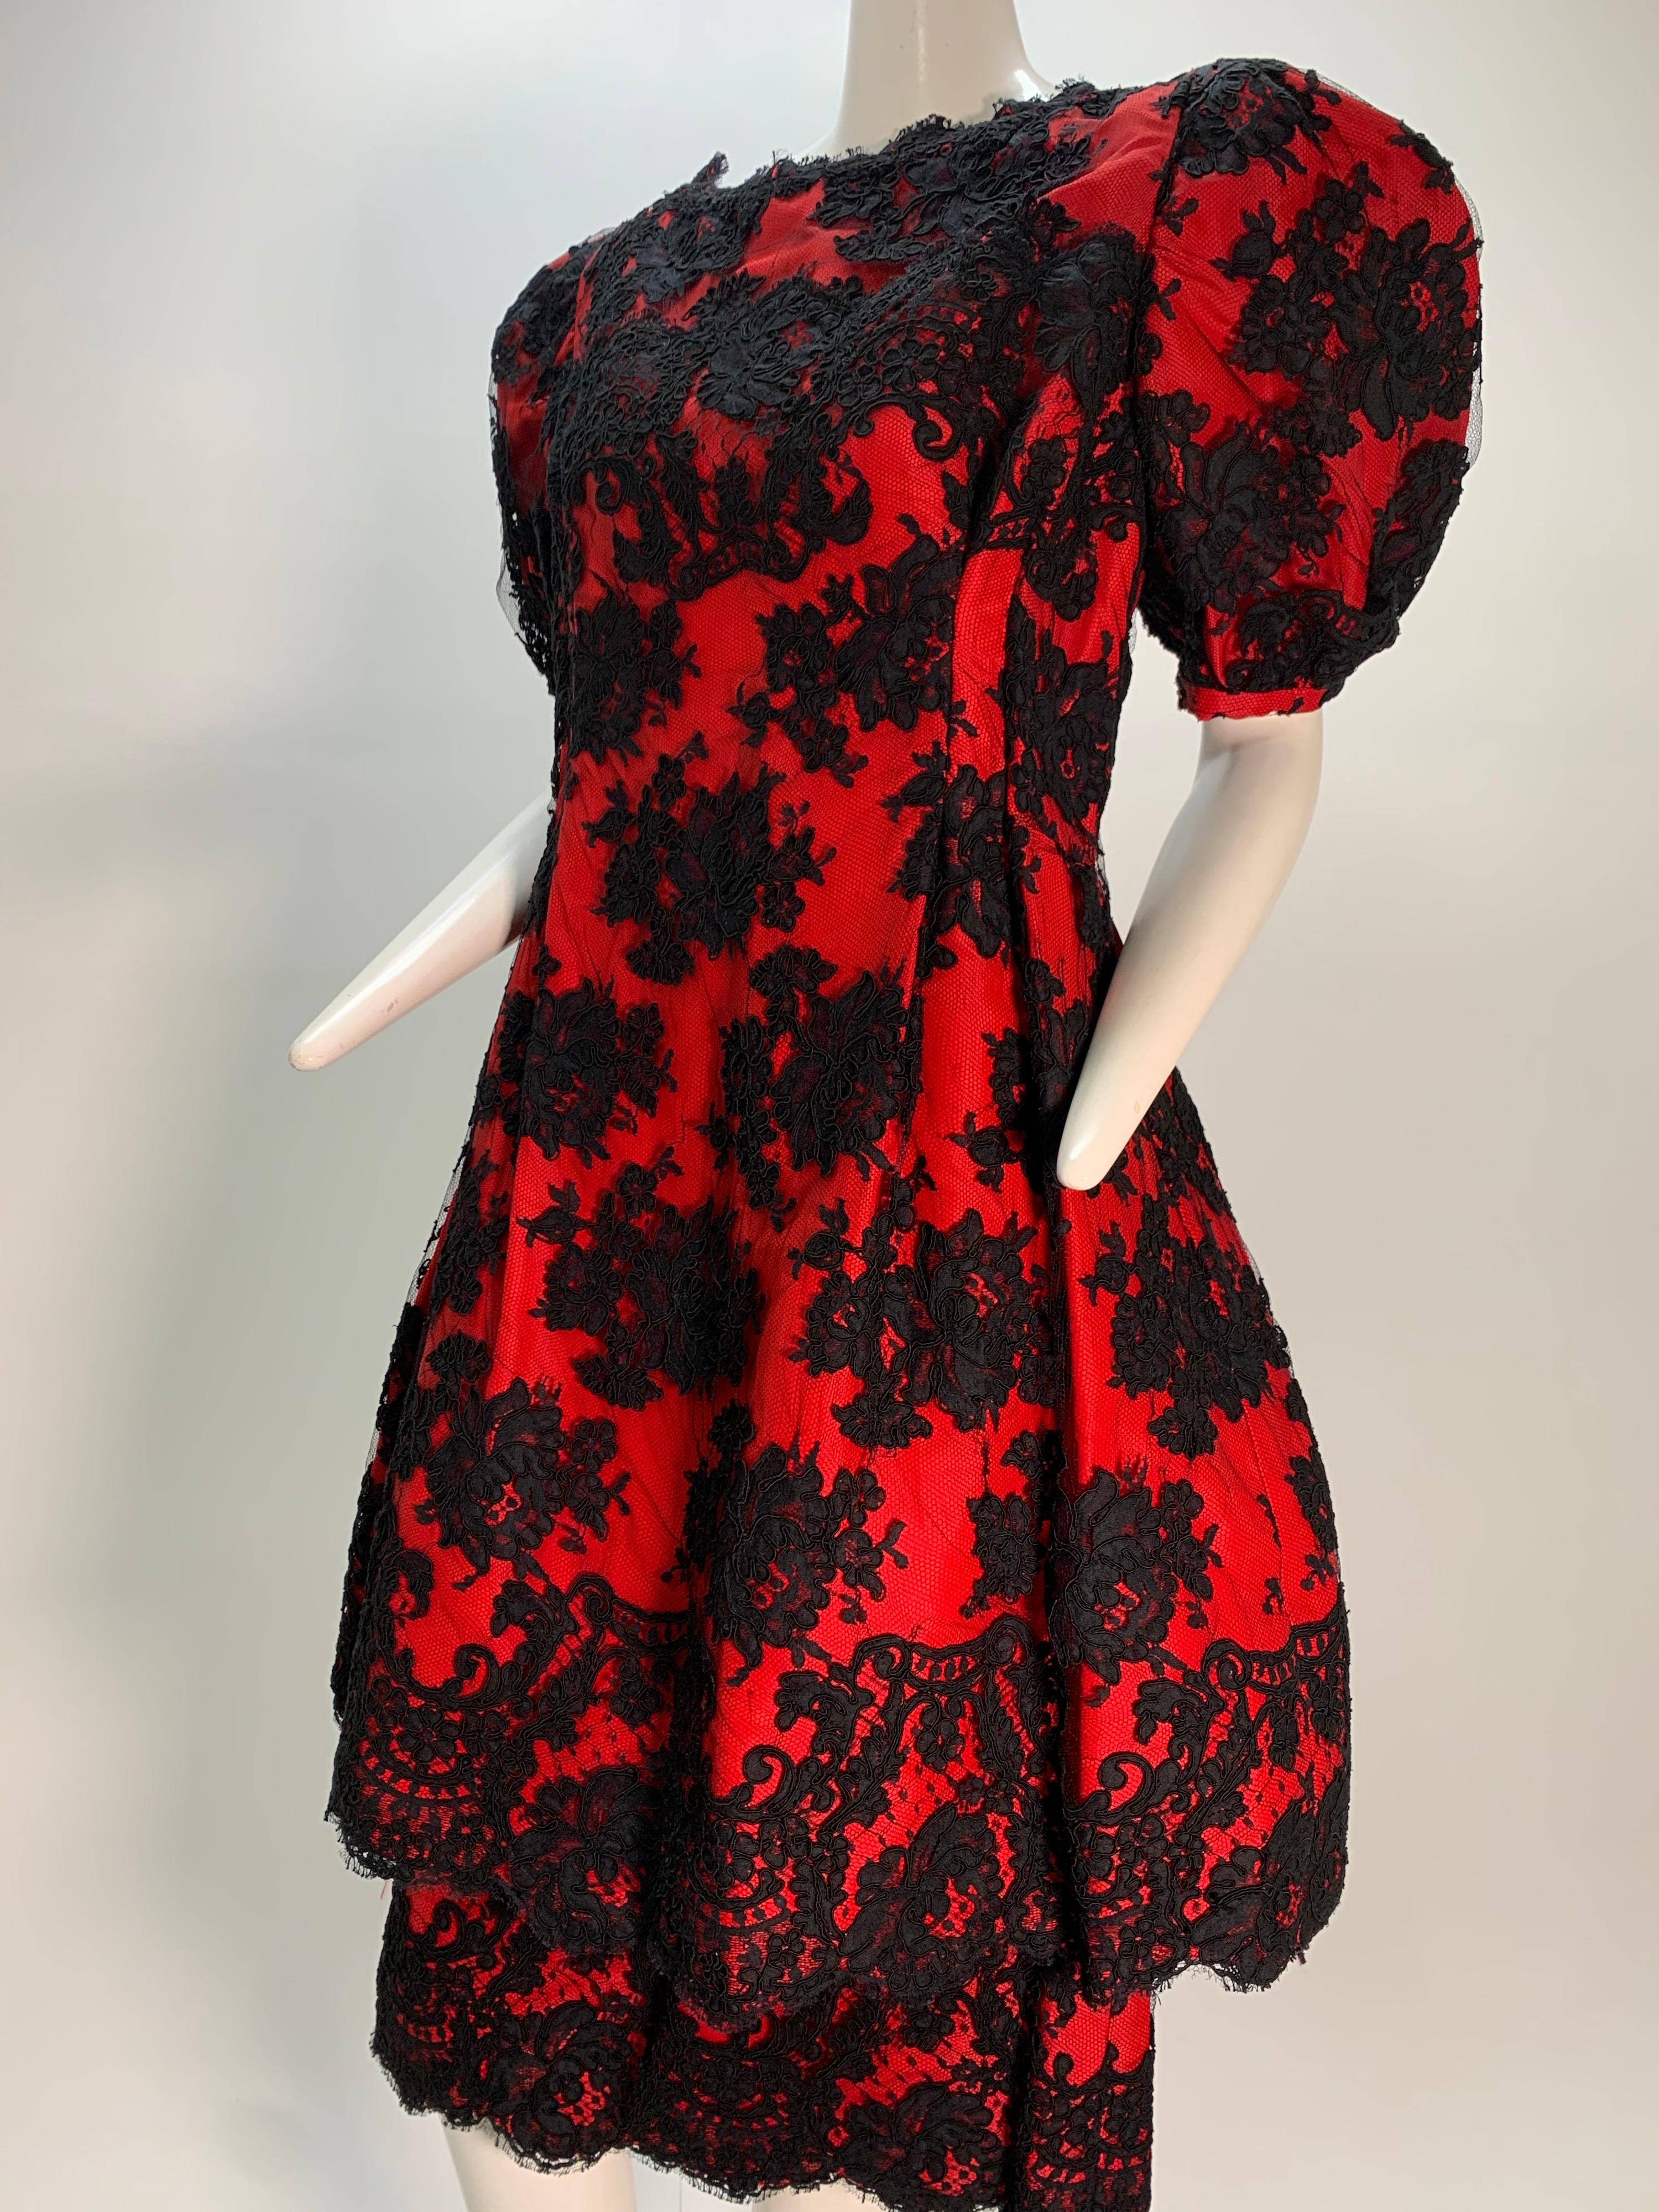 1980 Pauline Trigere Red Silk Taffeta & Black Lace Overlay Cocktail Dress  For Sale 9